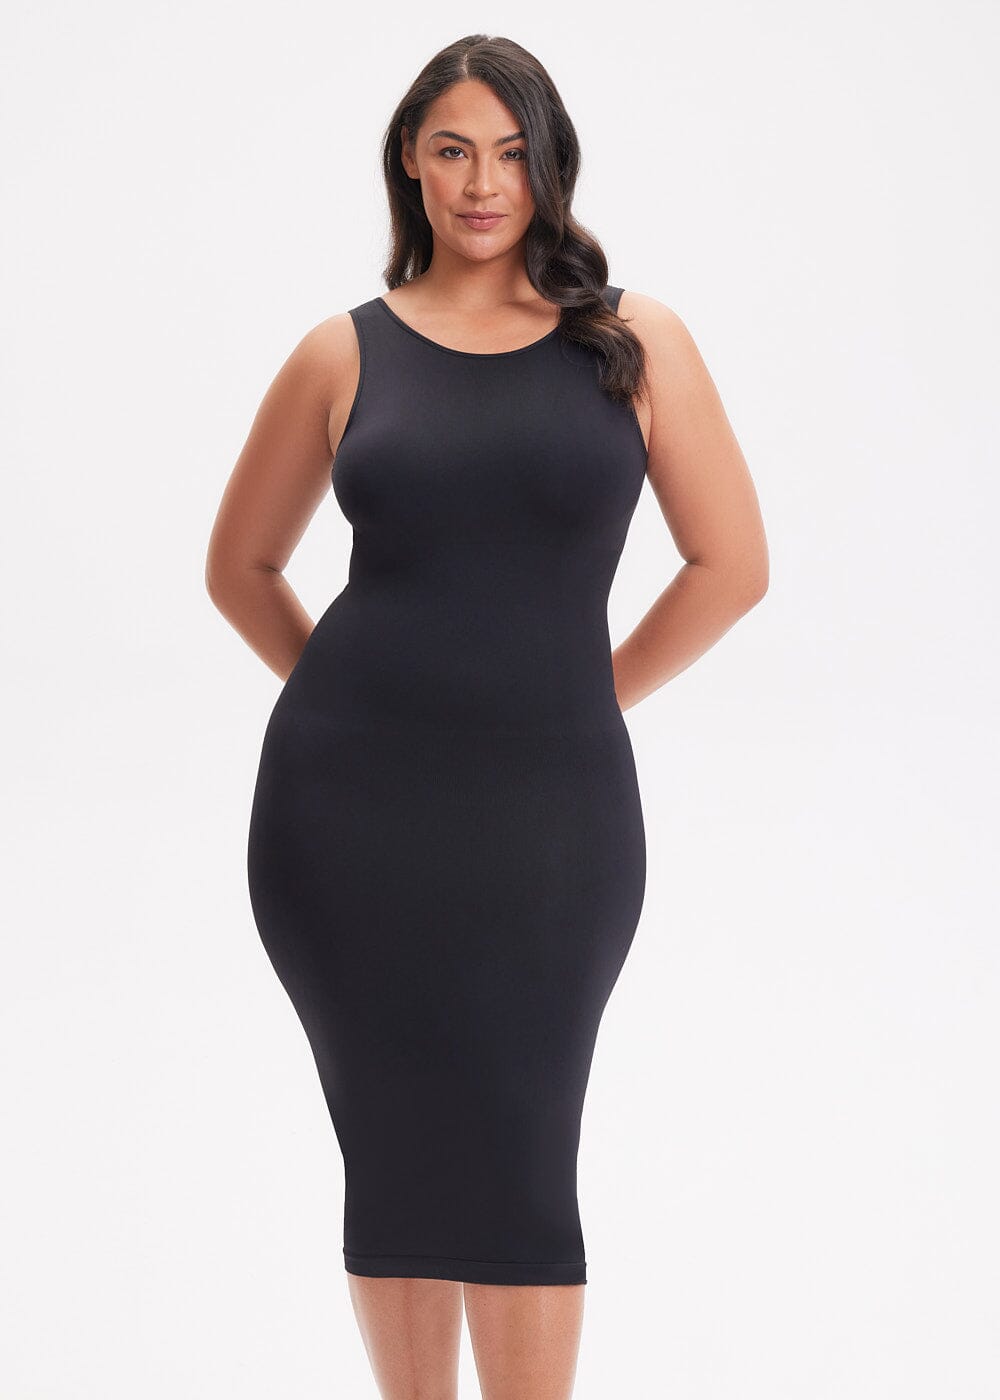 She's Waisted shapewear dress review ✨🖤, honest thoughts: i loved i